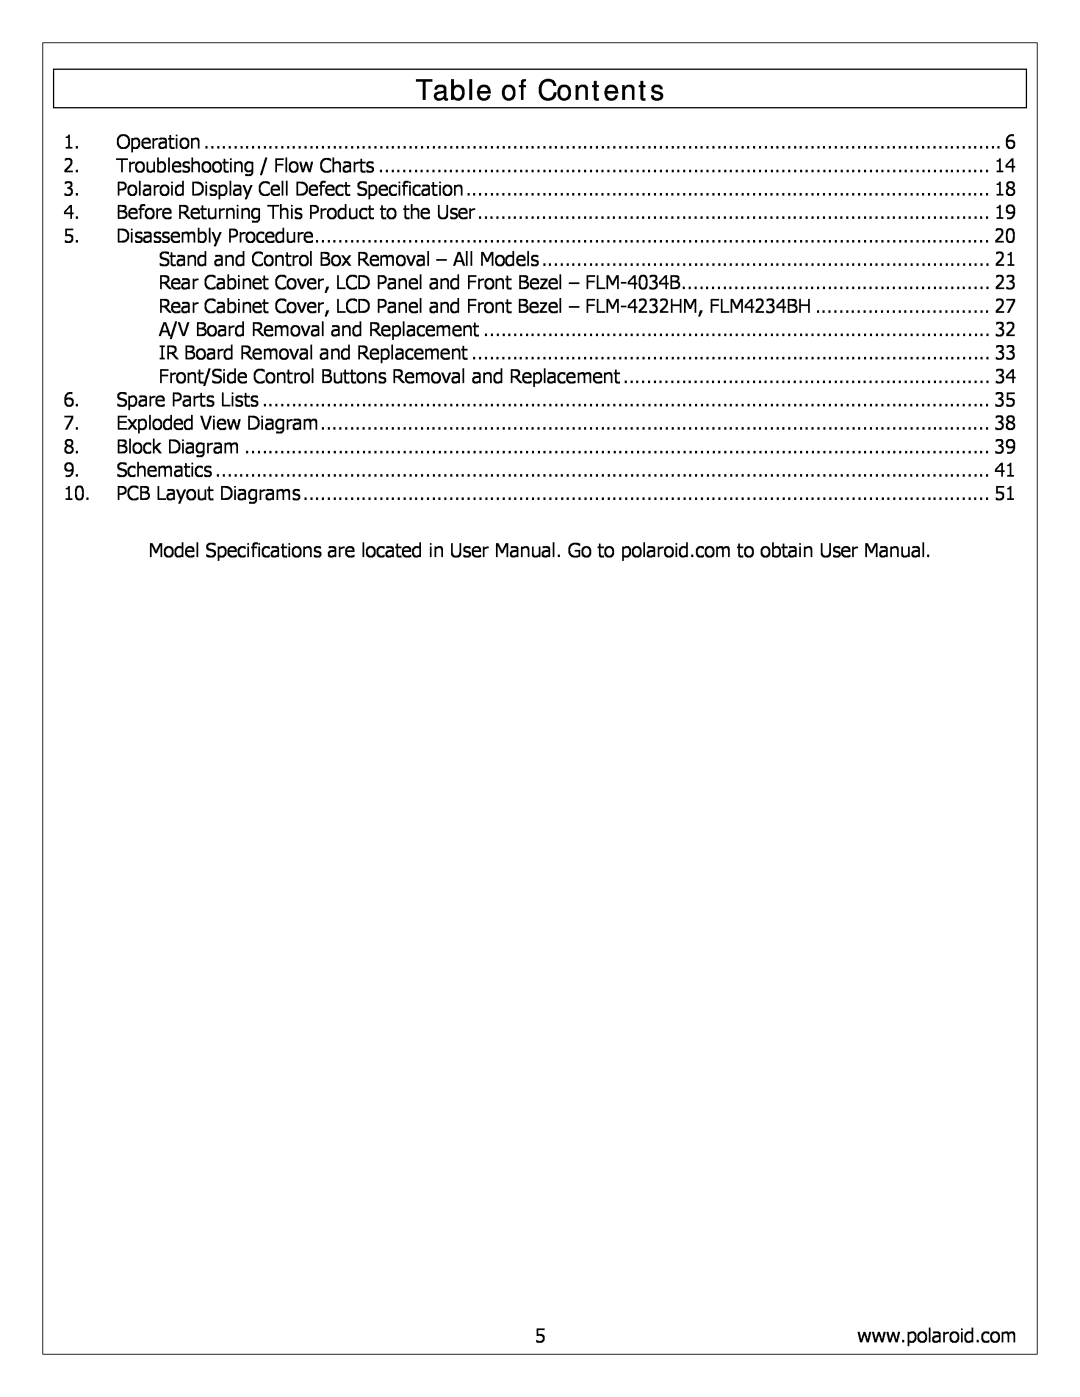 Polaroid FLM-4232HM, FLM-4034B, FLM-4234BH service manual Table of Contents 